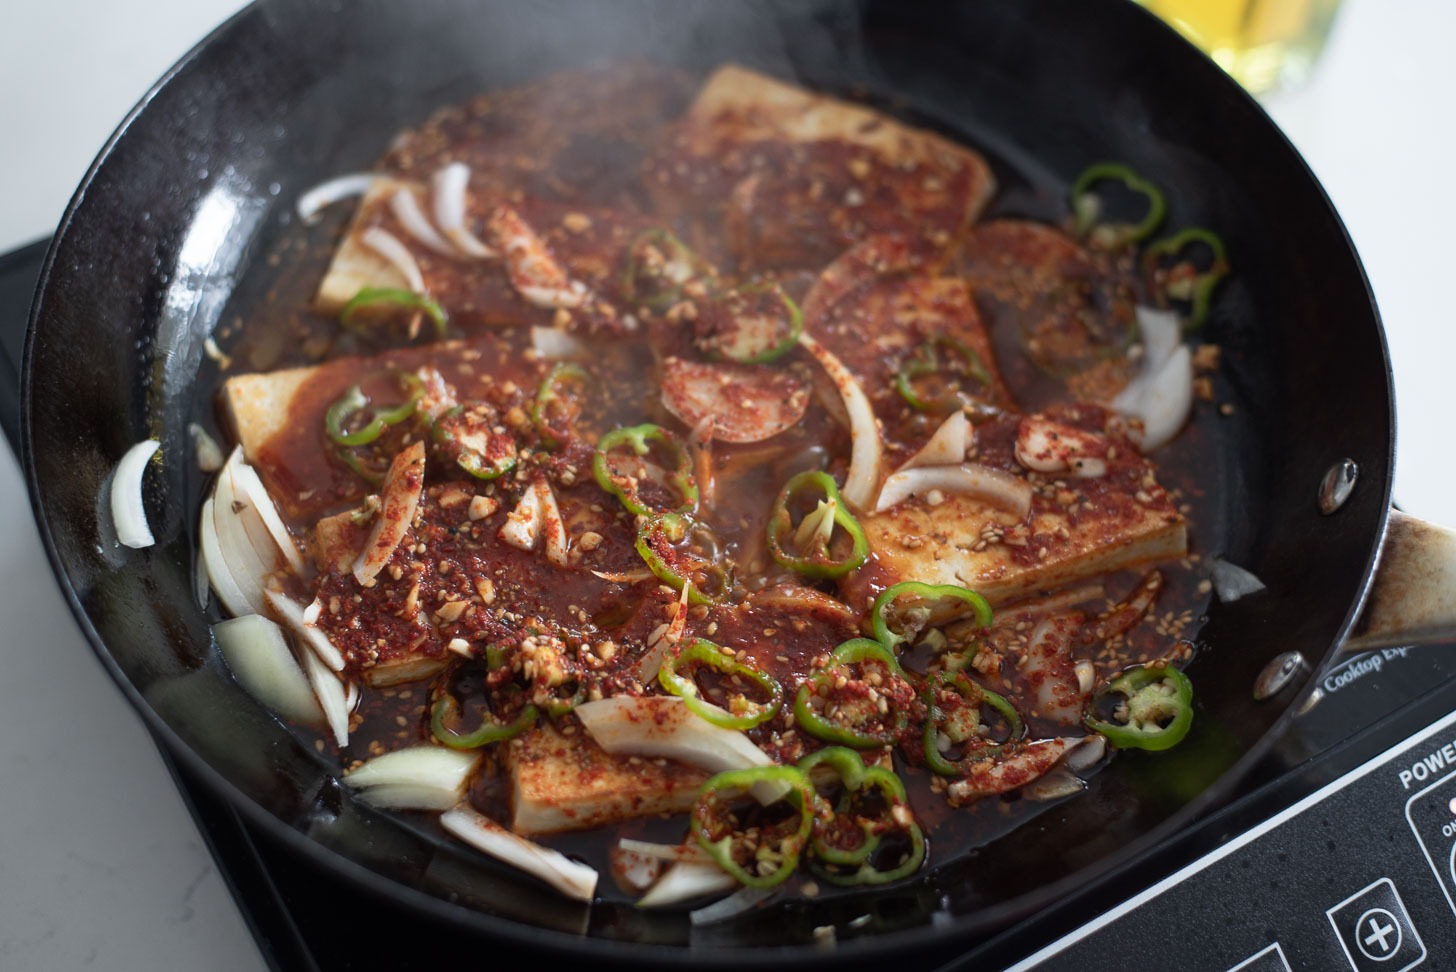 Dubu jorim ssauce and green chili slices are added to tofu slices in a skillet.